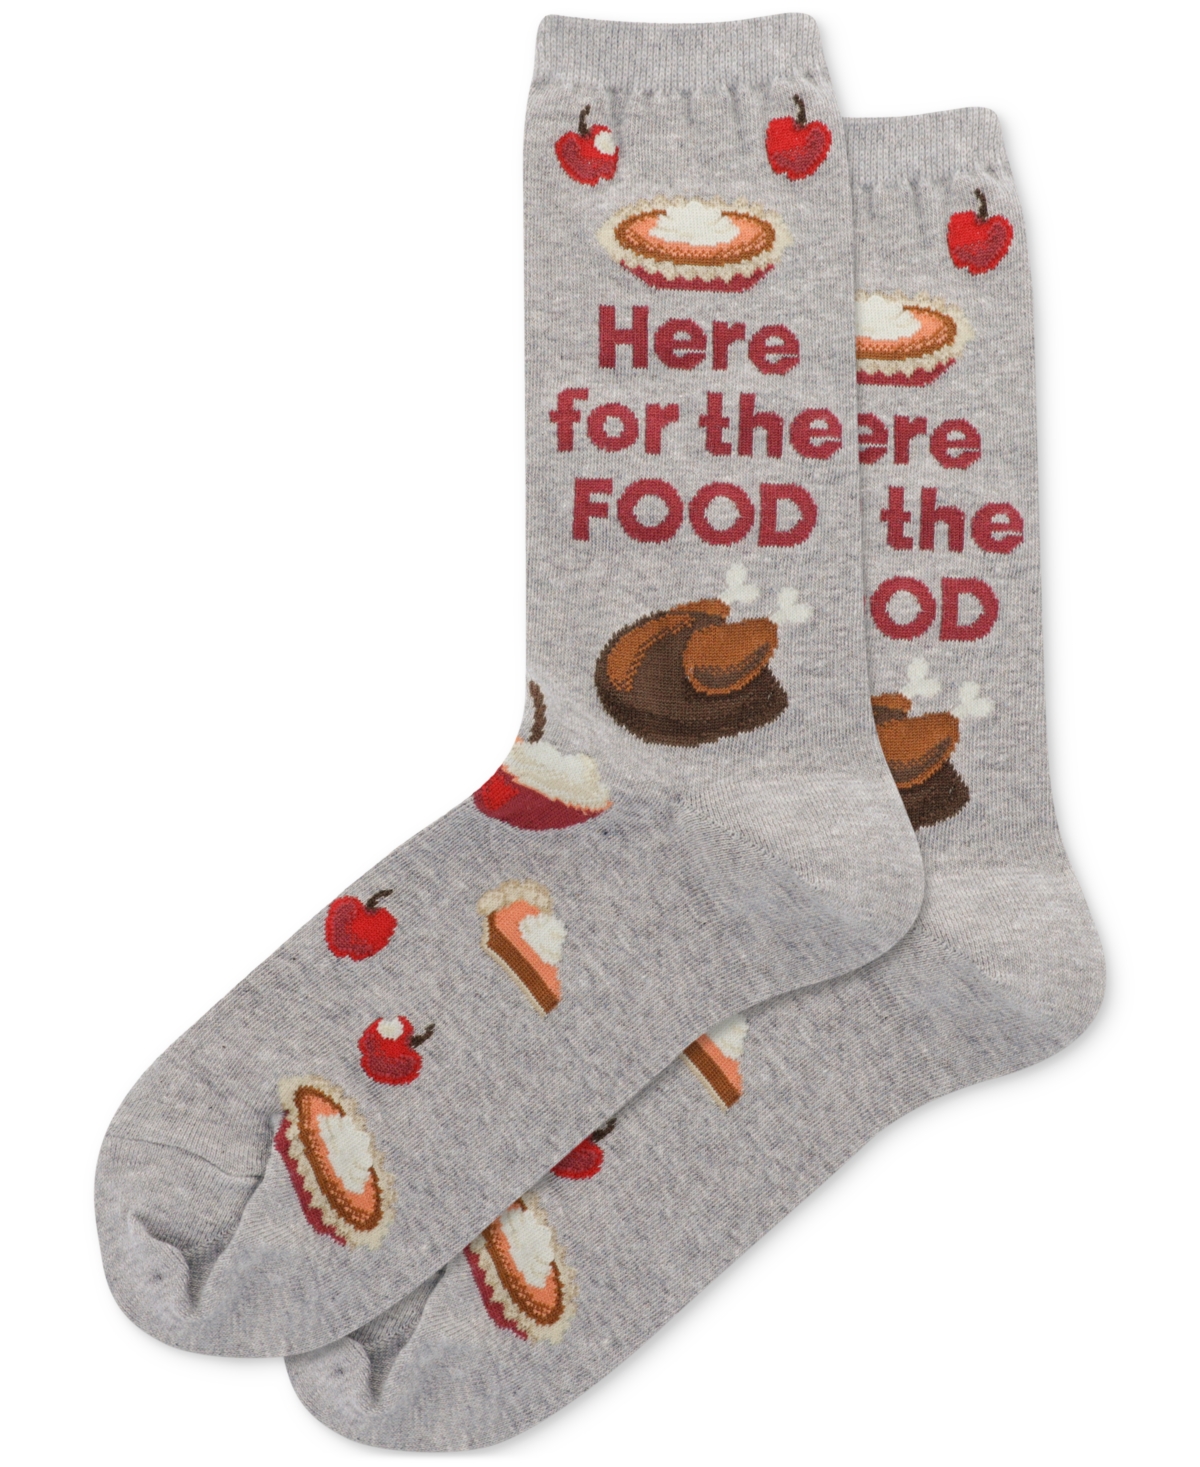 Hot Sox Women's Here for the Food Crew Socks